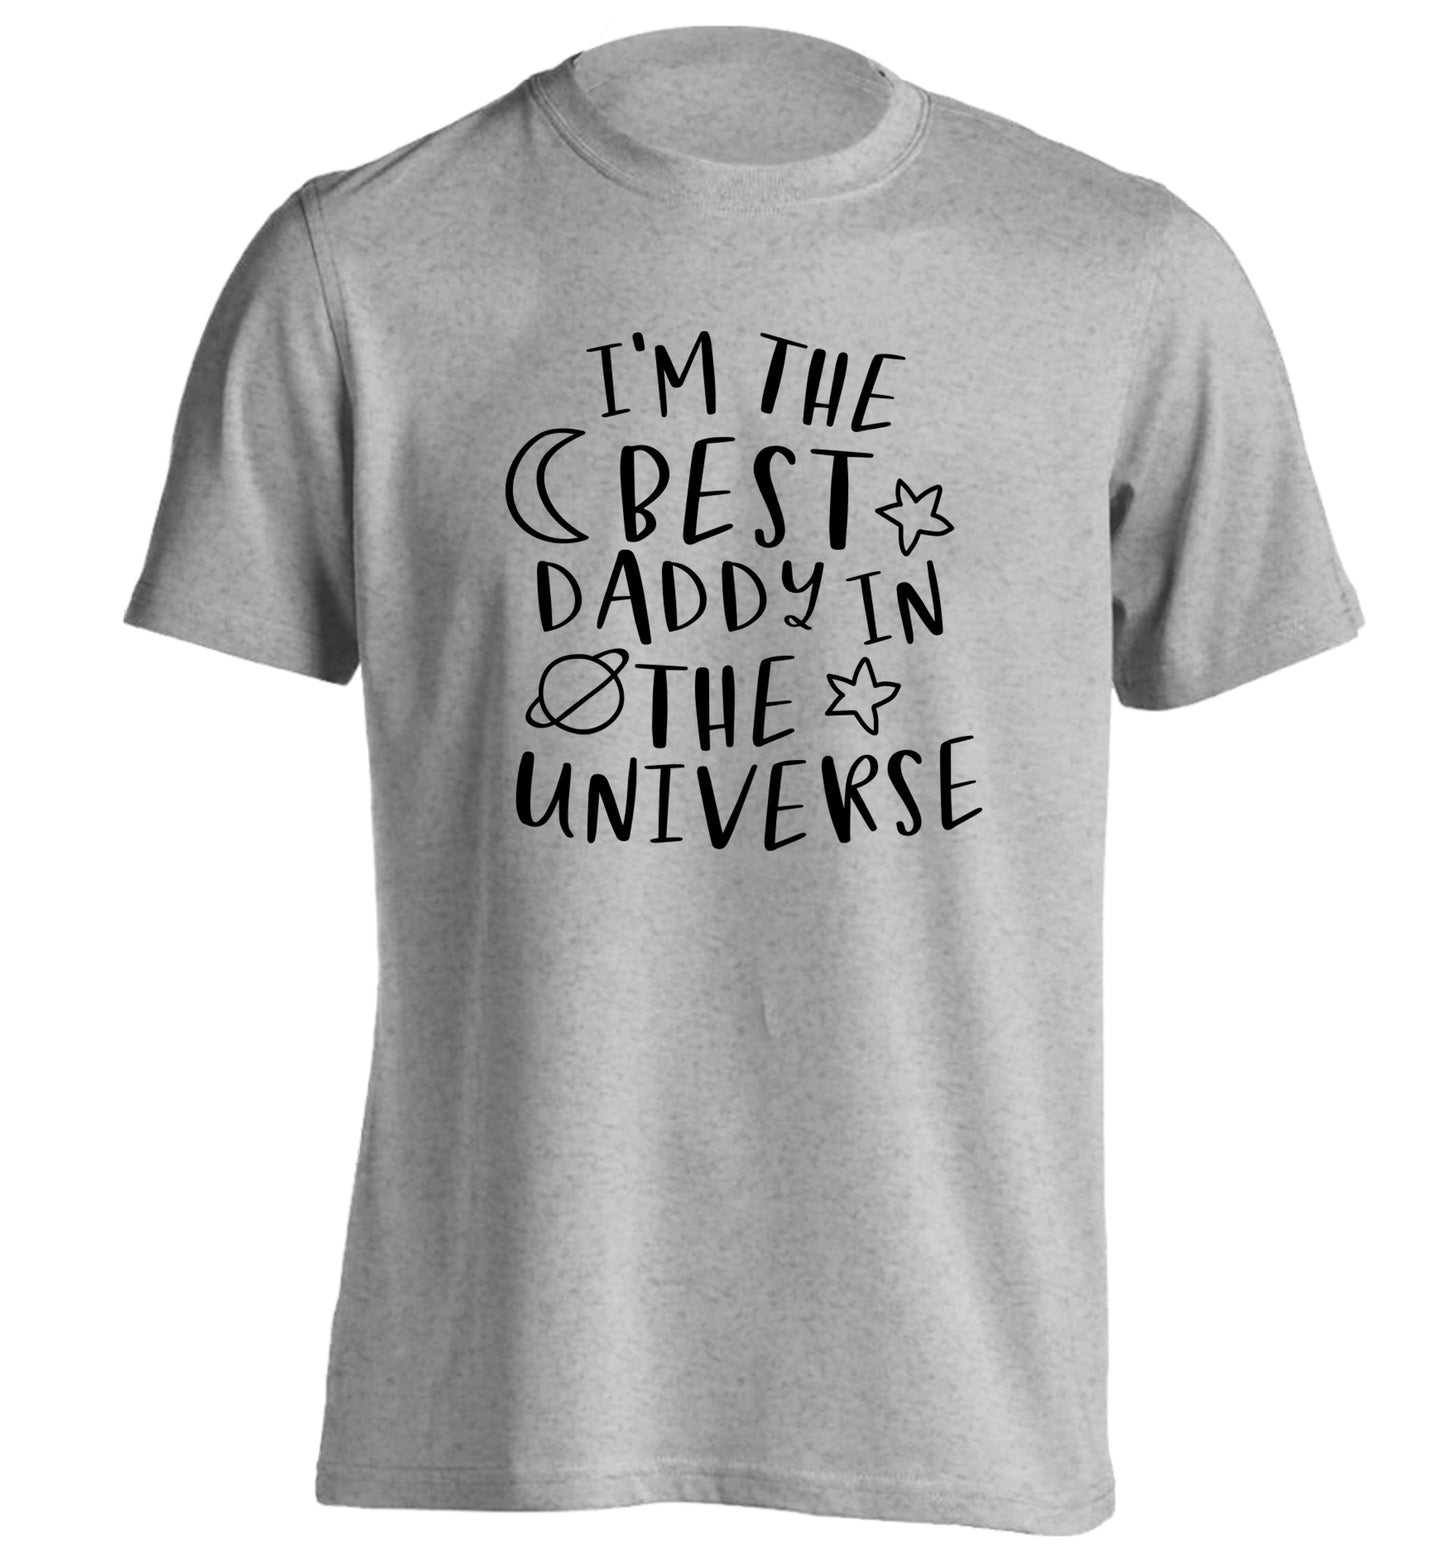 I'm the best daddy in the universe adults unisex grey Tshirt 2XL